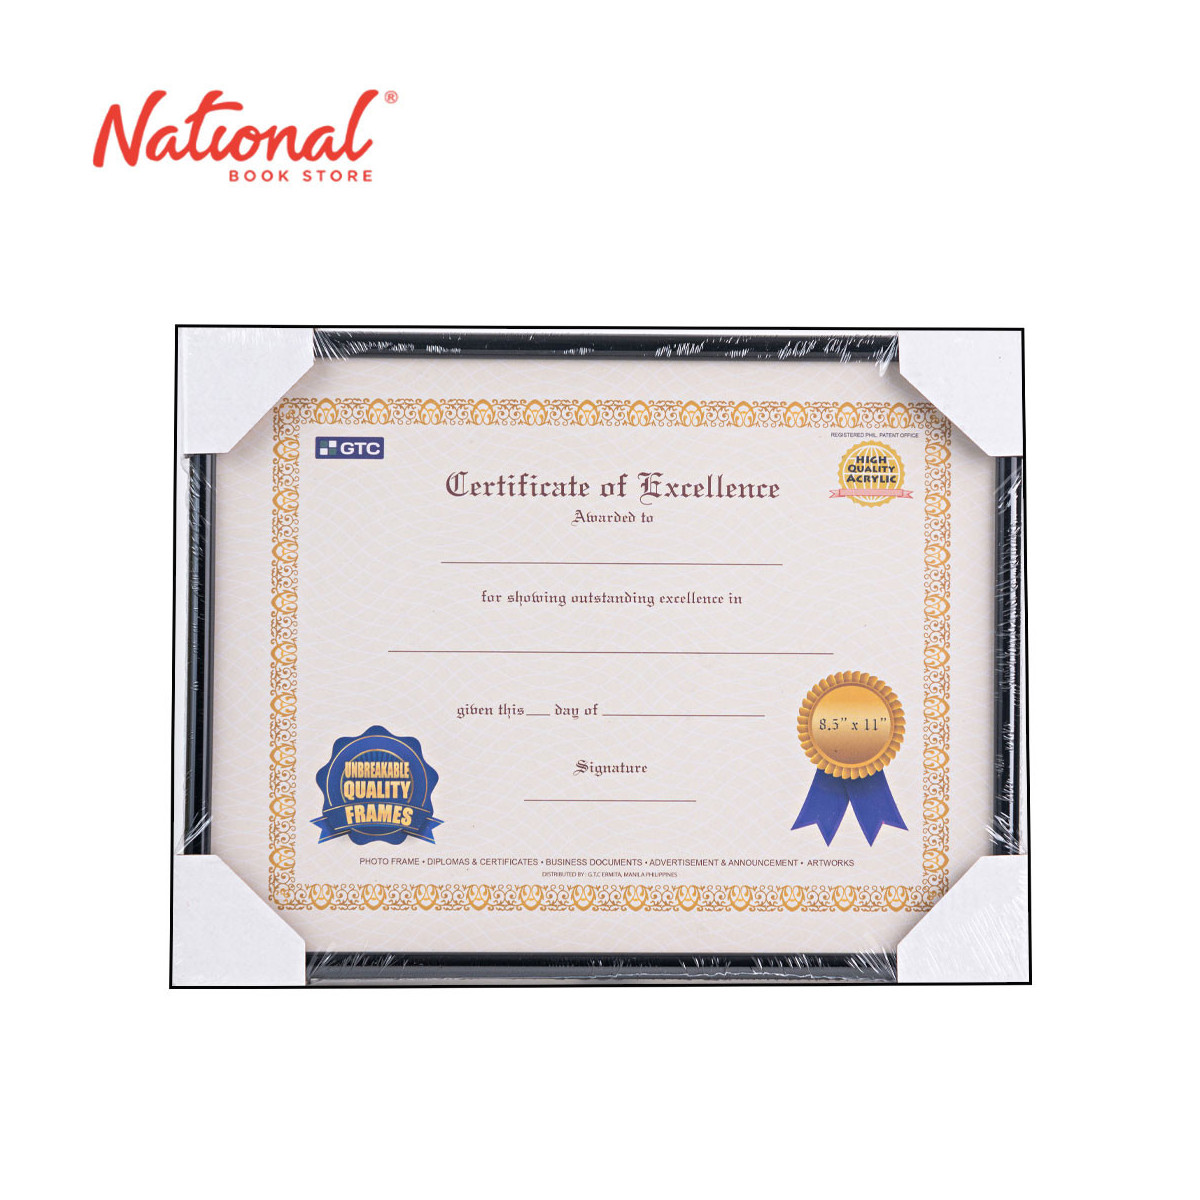 GTC Certificate Frame Gl-811 8.5x11 inches PVC - Gifts - Frames